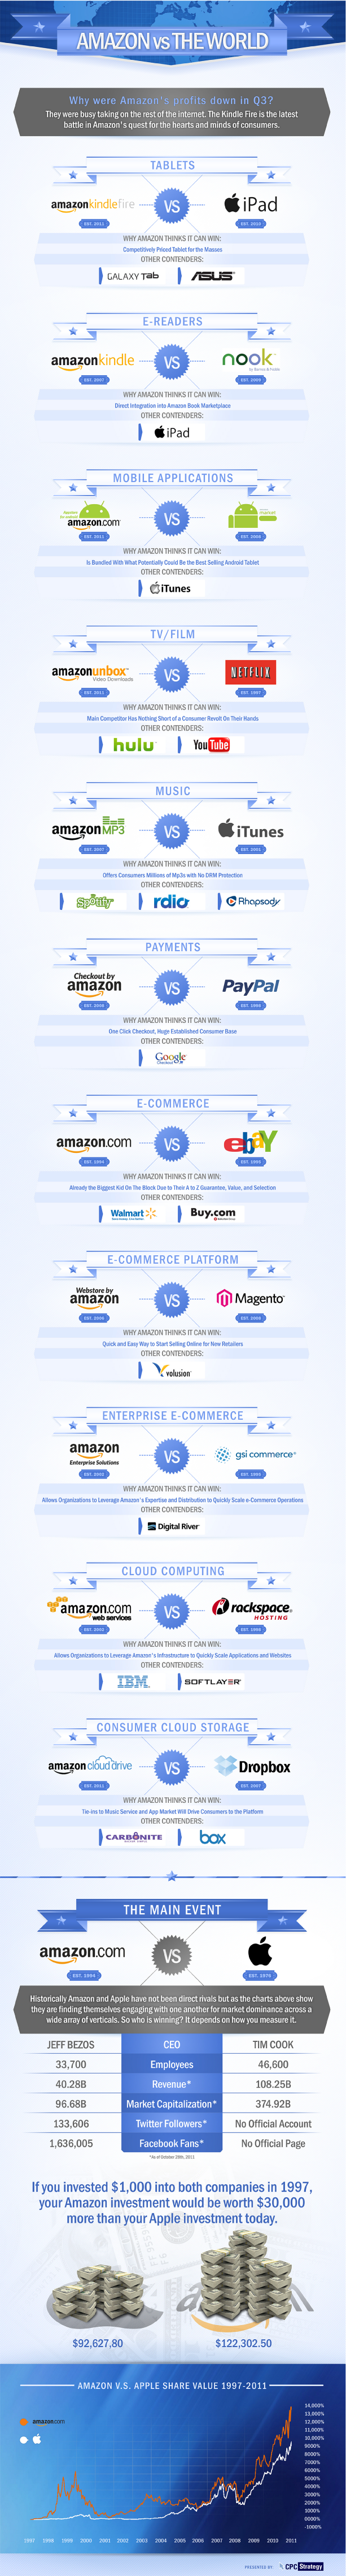 Amazon v. The World - An Infographic